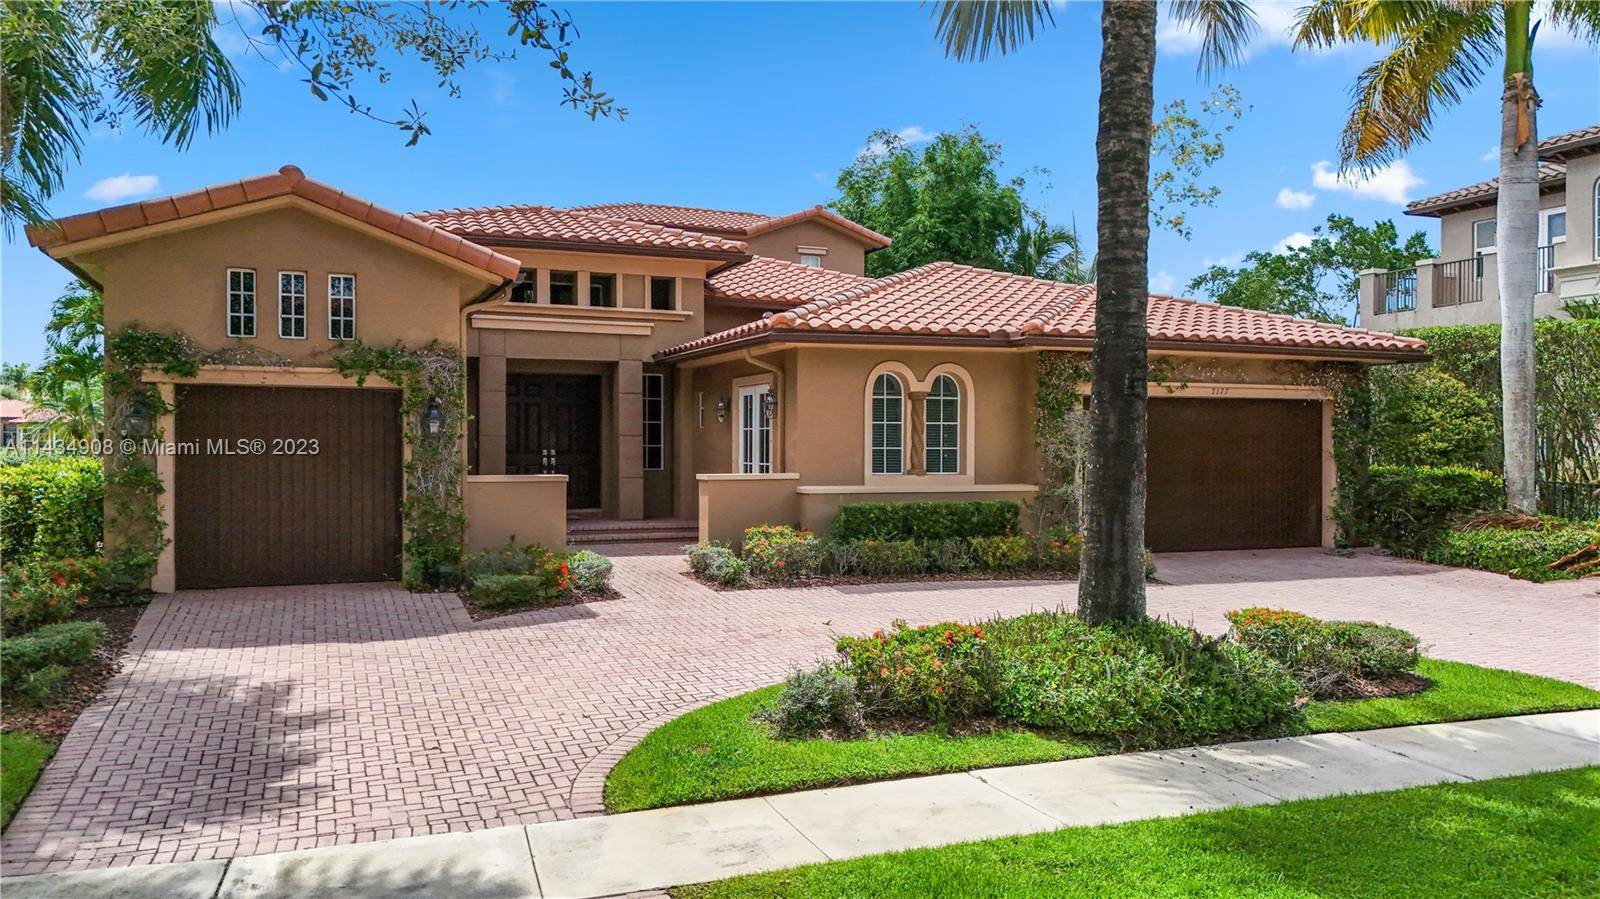 Welcome home to your exquisite oasis nested in the prestigious gated community of Heron Bay in Parkland.